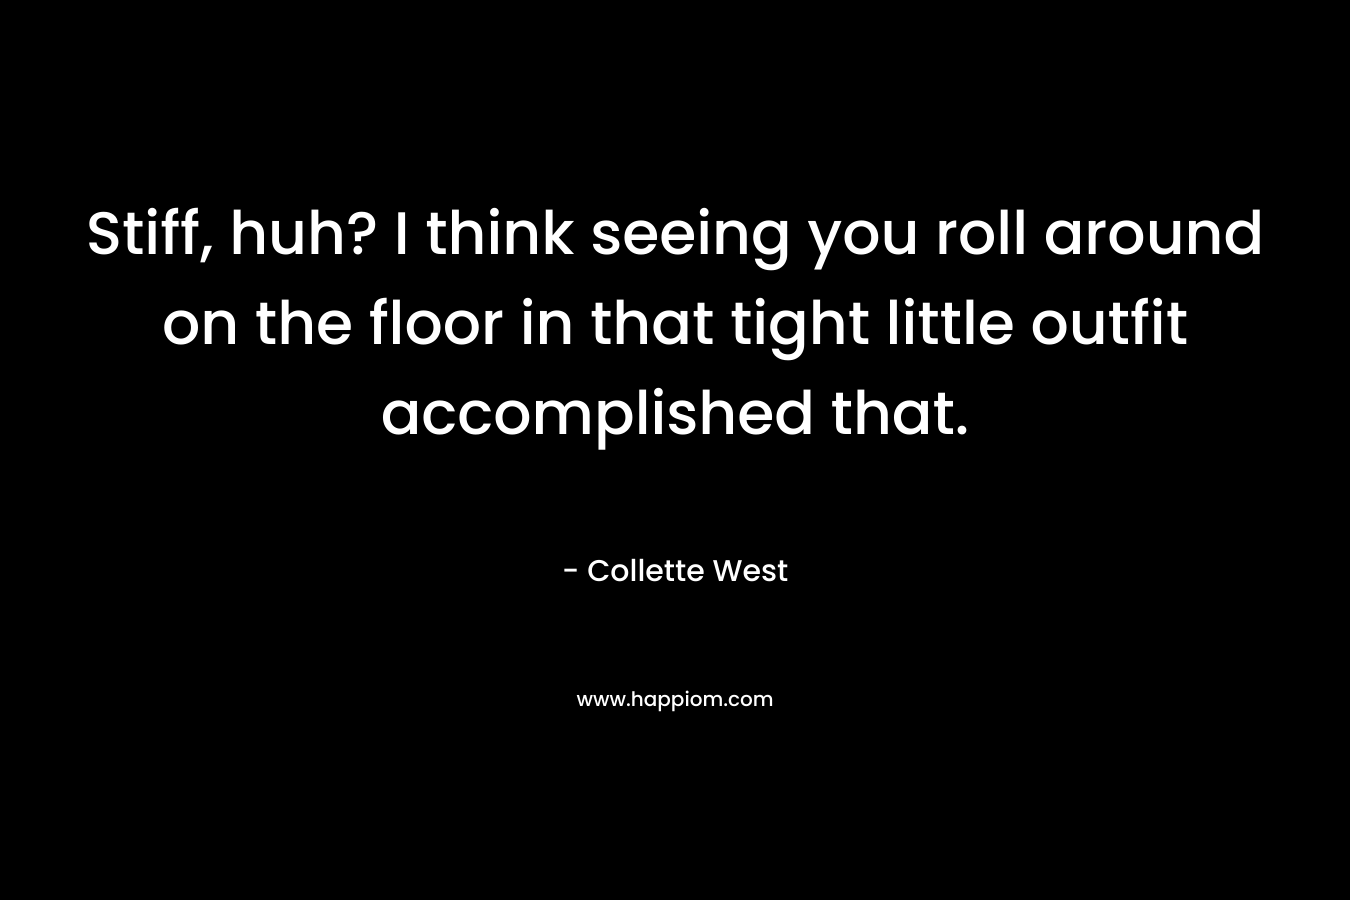 Stiff, huh? I think seeing you roll around on the floor in that tight little outfit accomplished that. – Collette West